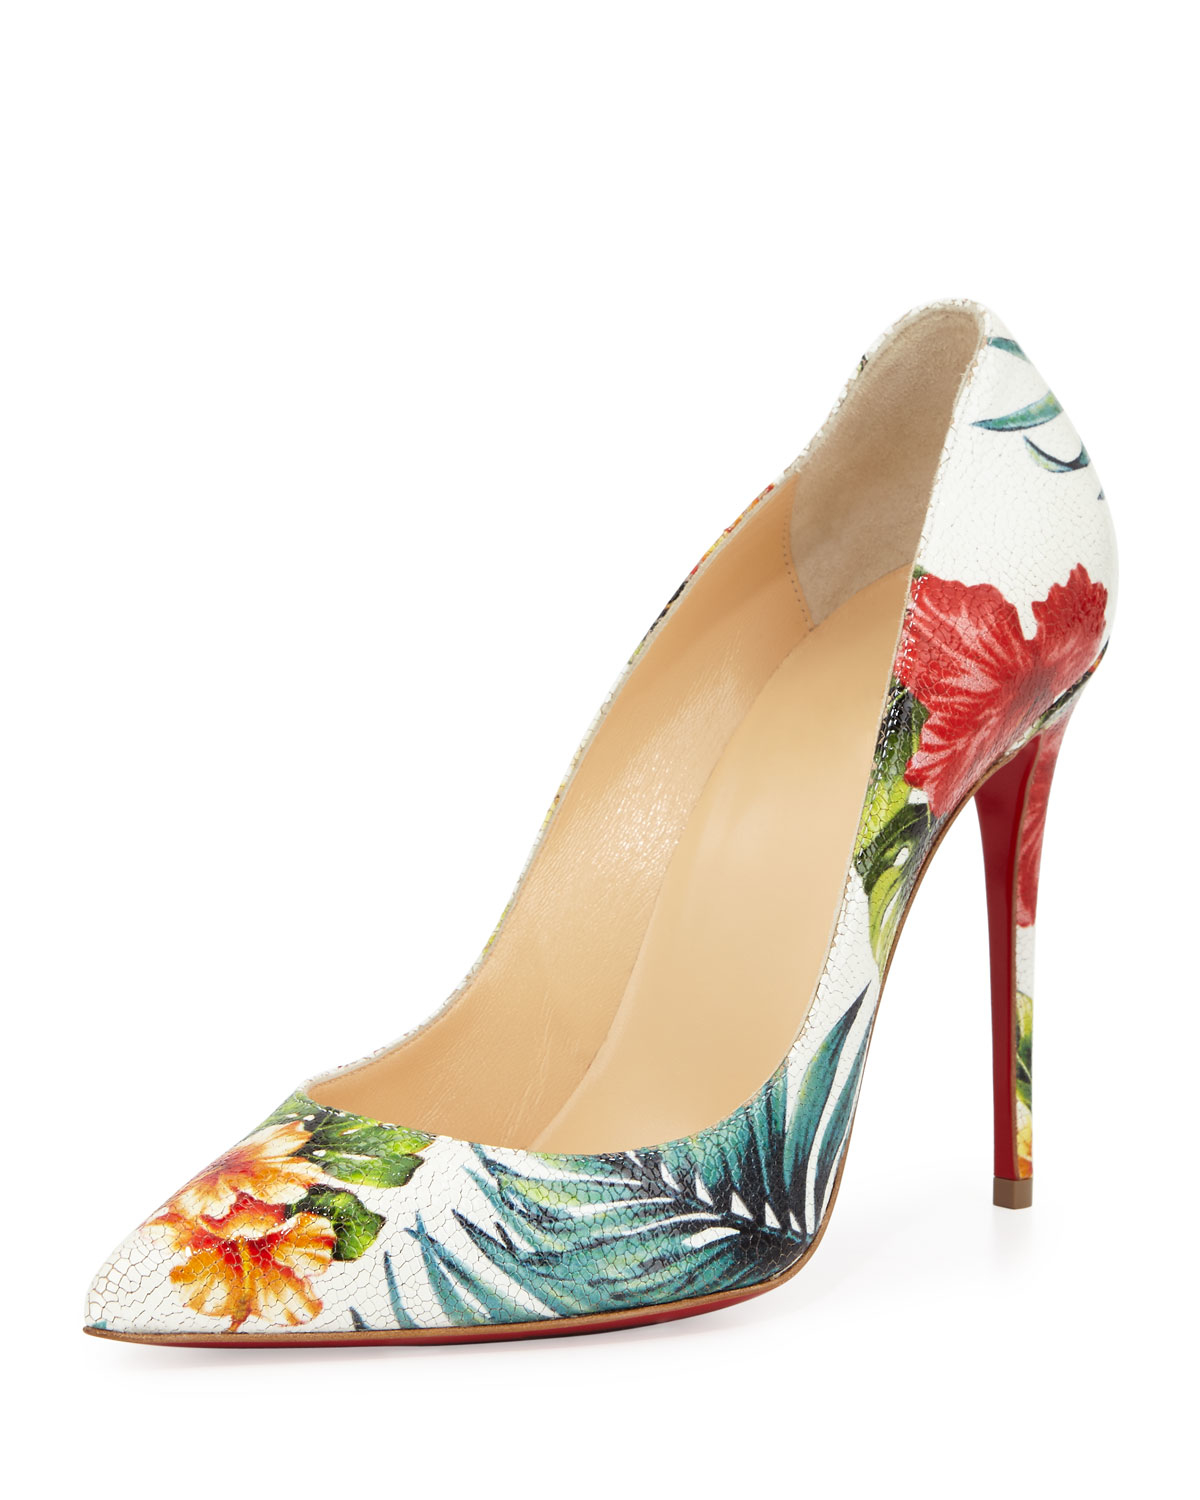 christian-louboutin-white-multi-pigalle-follies-floral-100mm-red-sole-pump-white-product-1-420172517-normal.jpeg